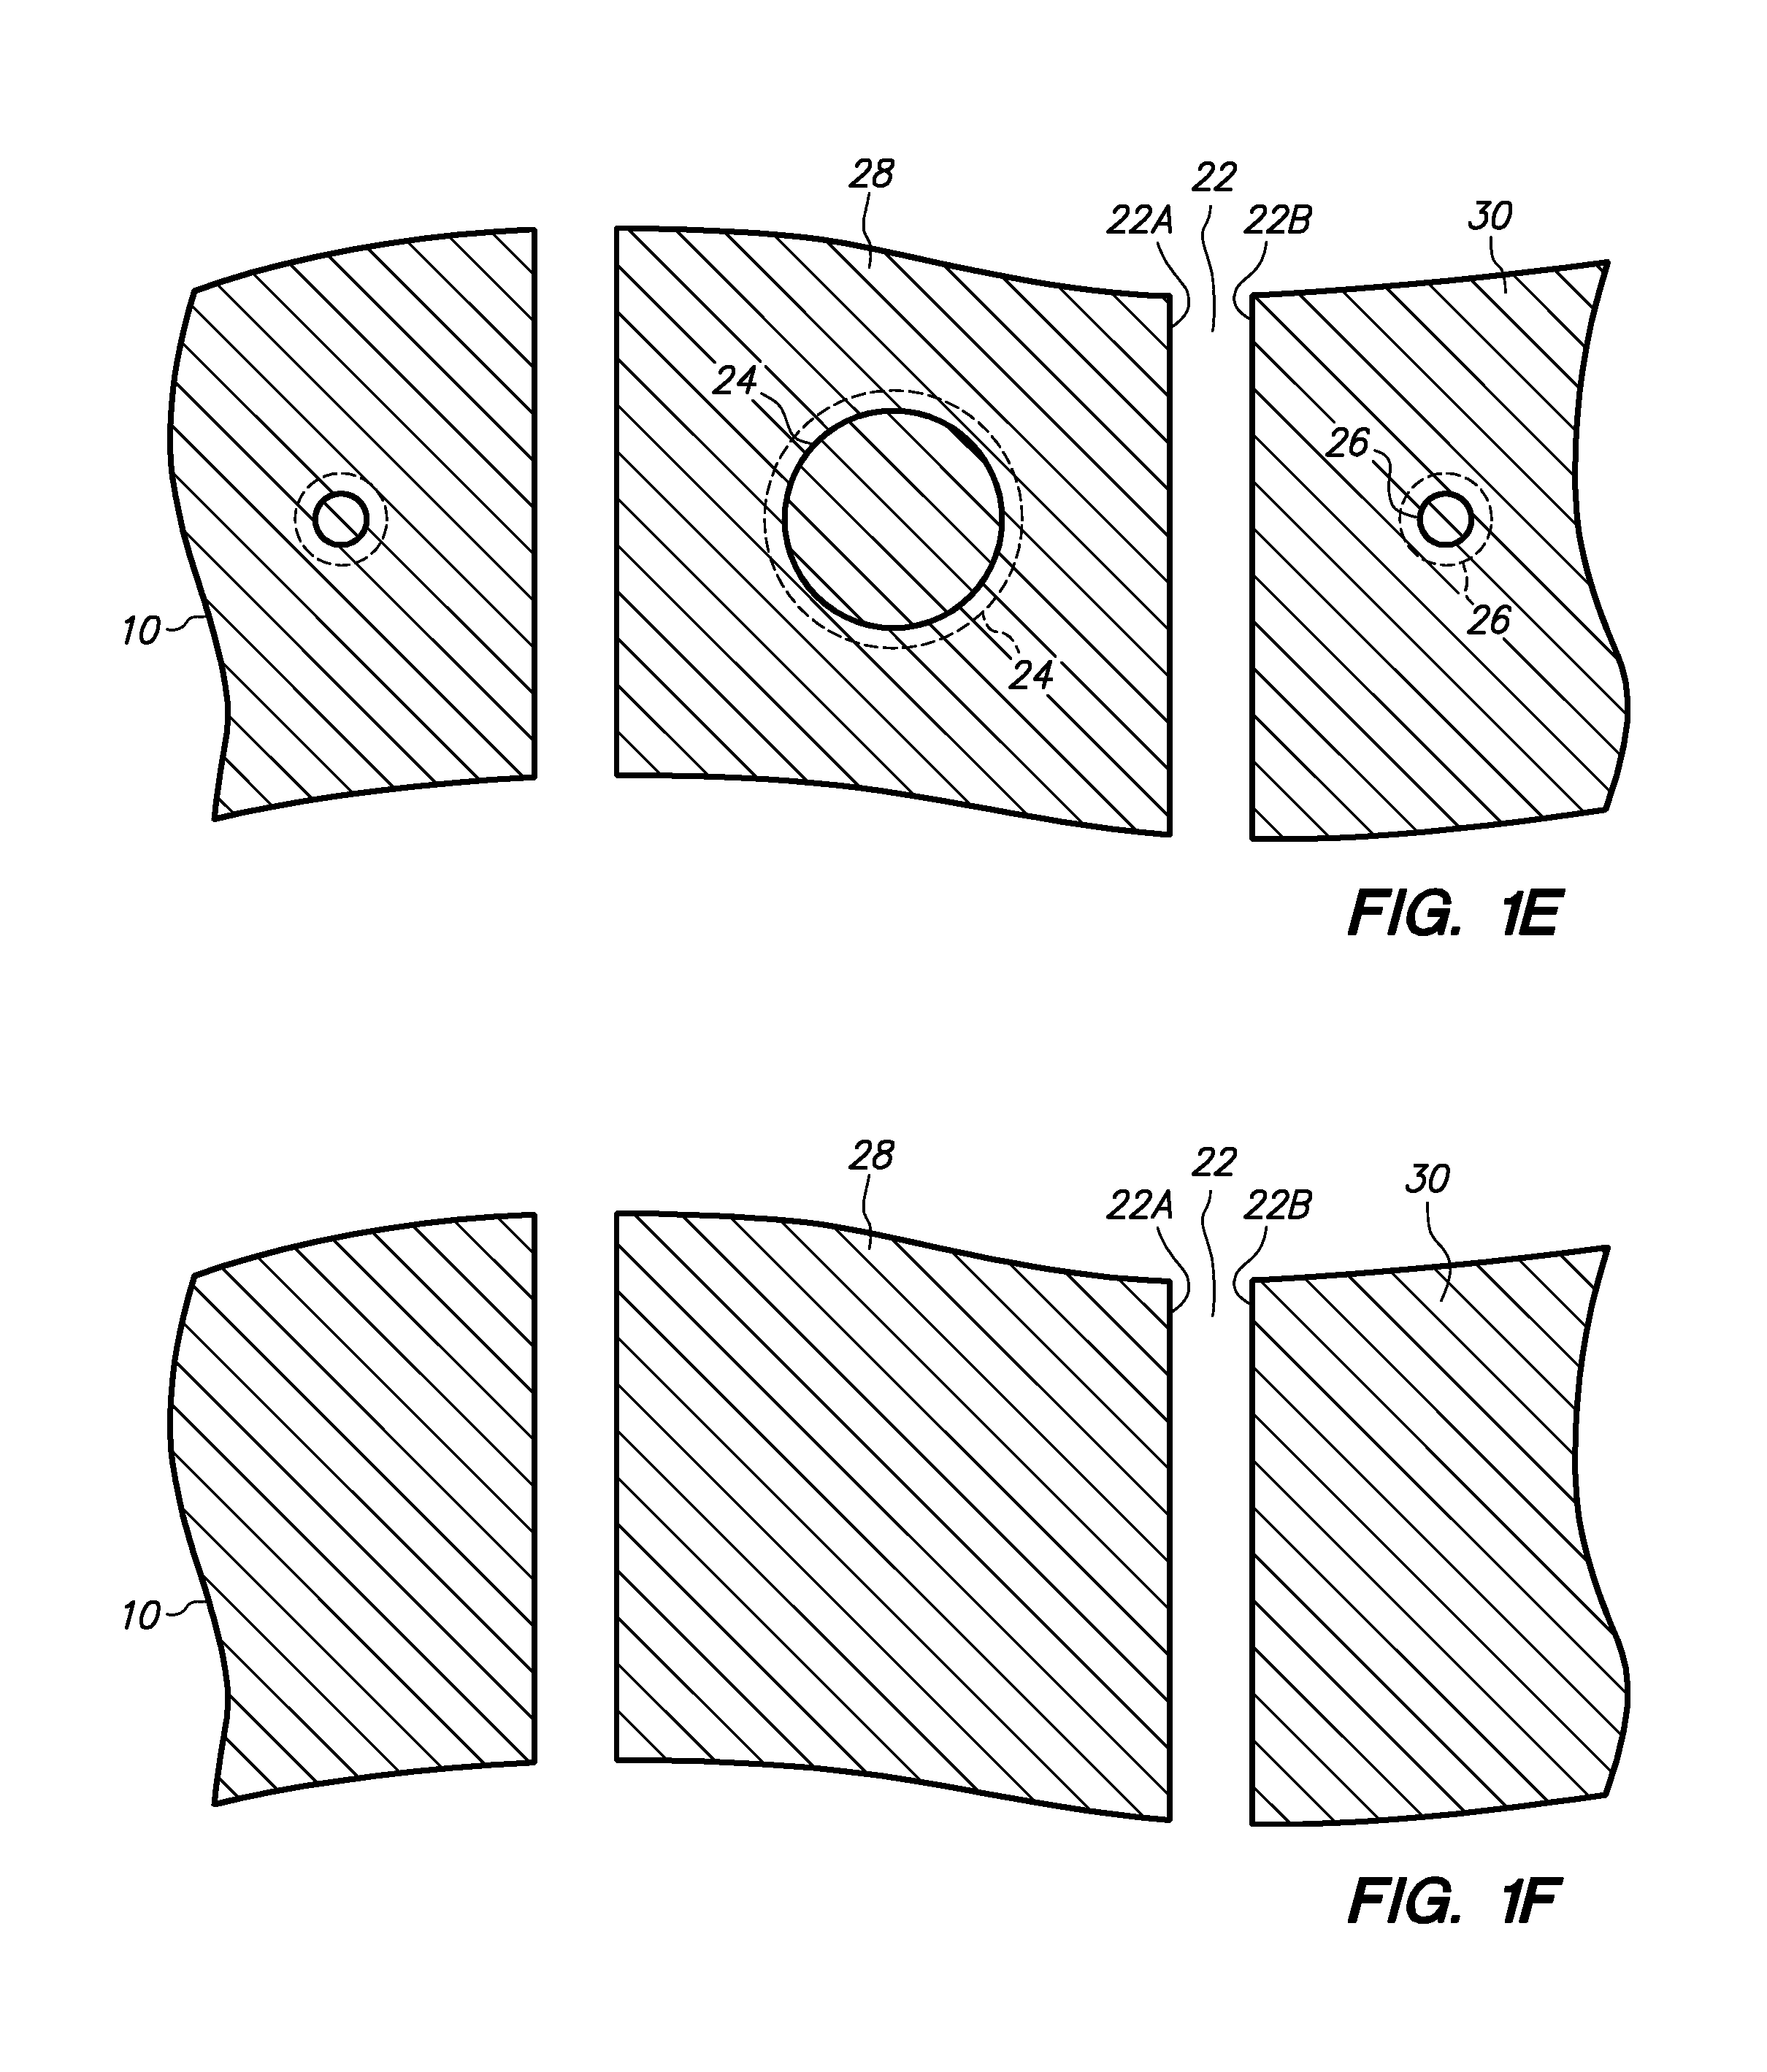 Method of making a semiconductor chip assembly with a post/base heat spreader and an adhesive between the base and a terminal